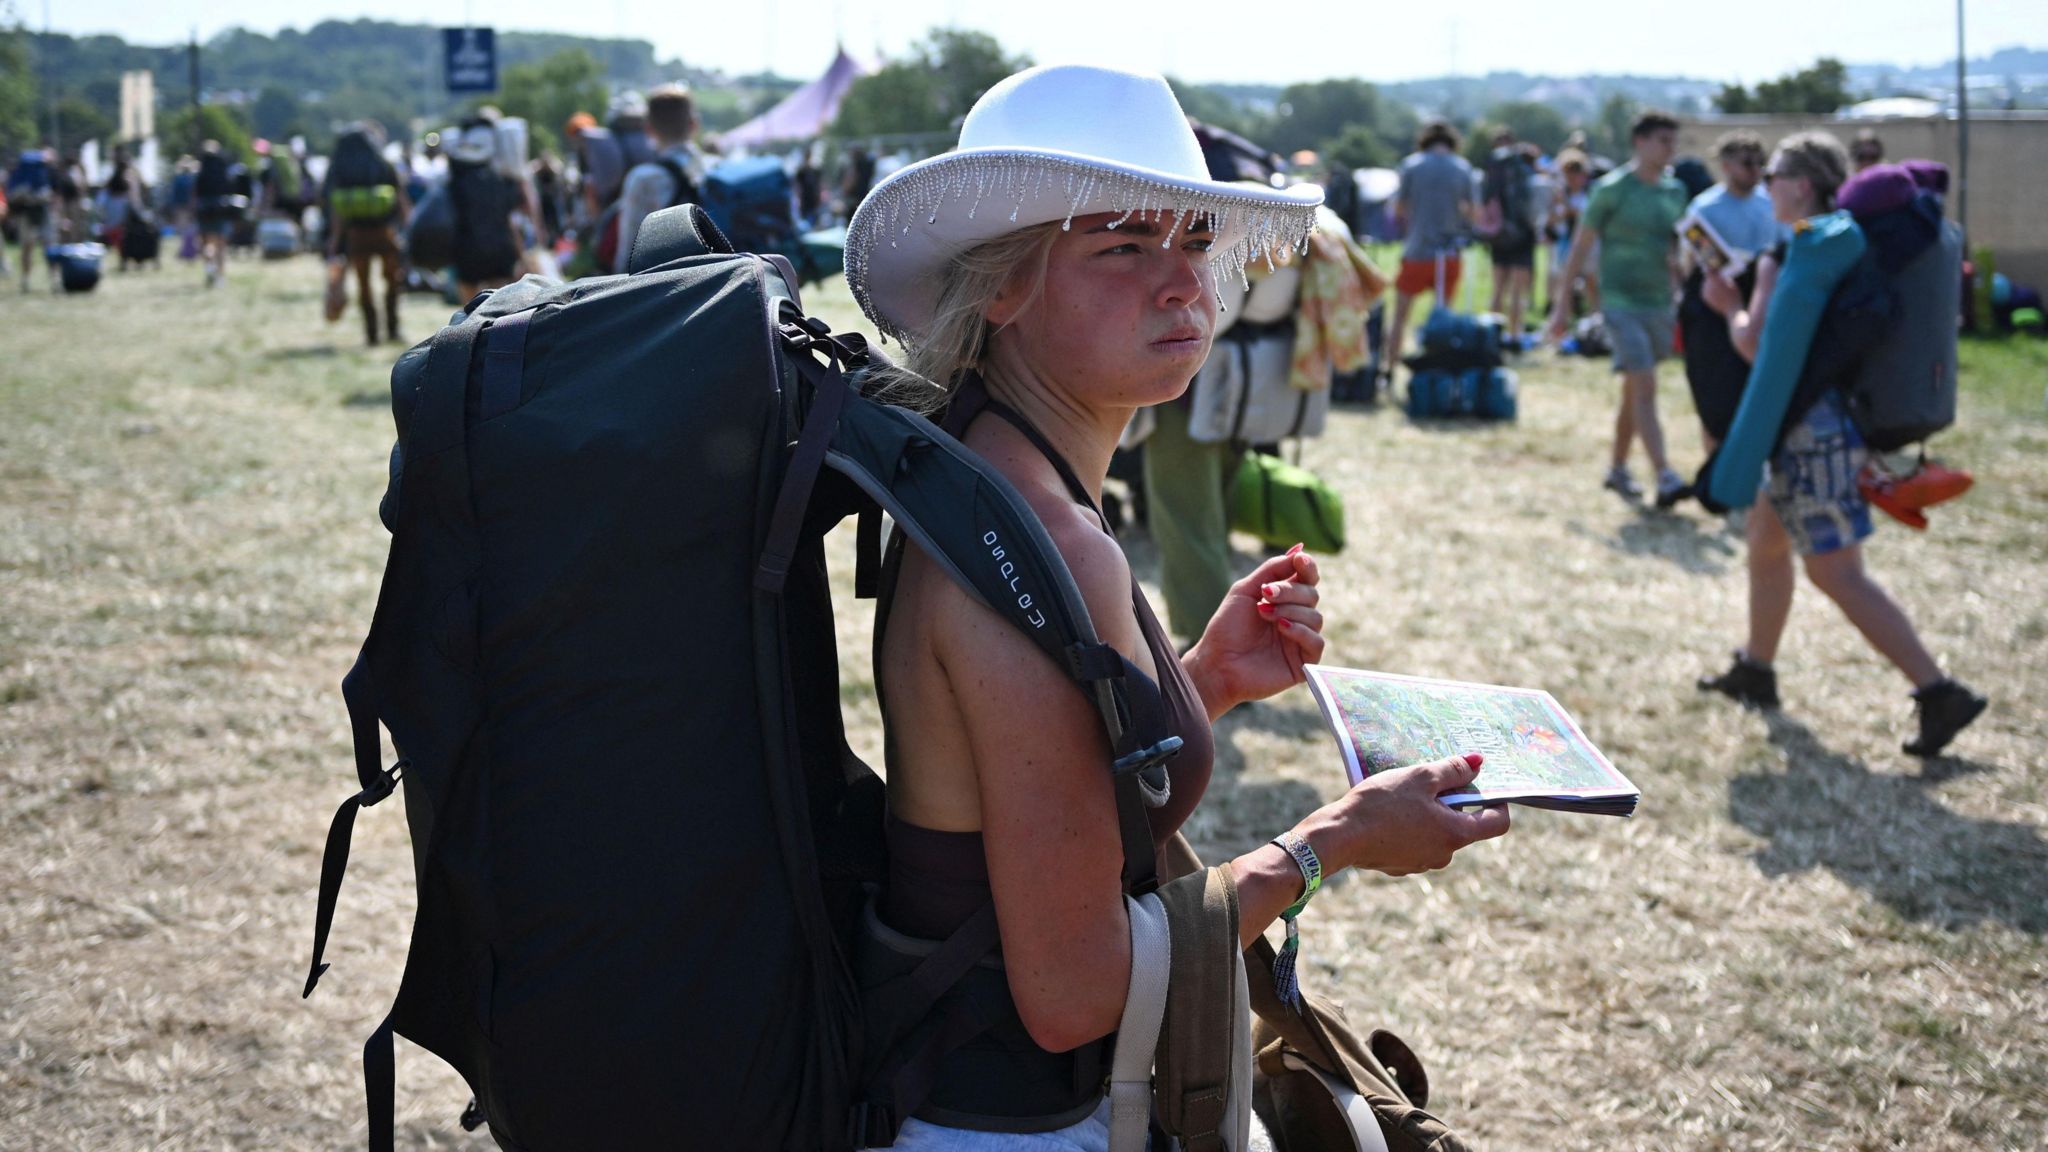 Woman arriving at Glastonbury with a large rucksack and a cowboy hat